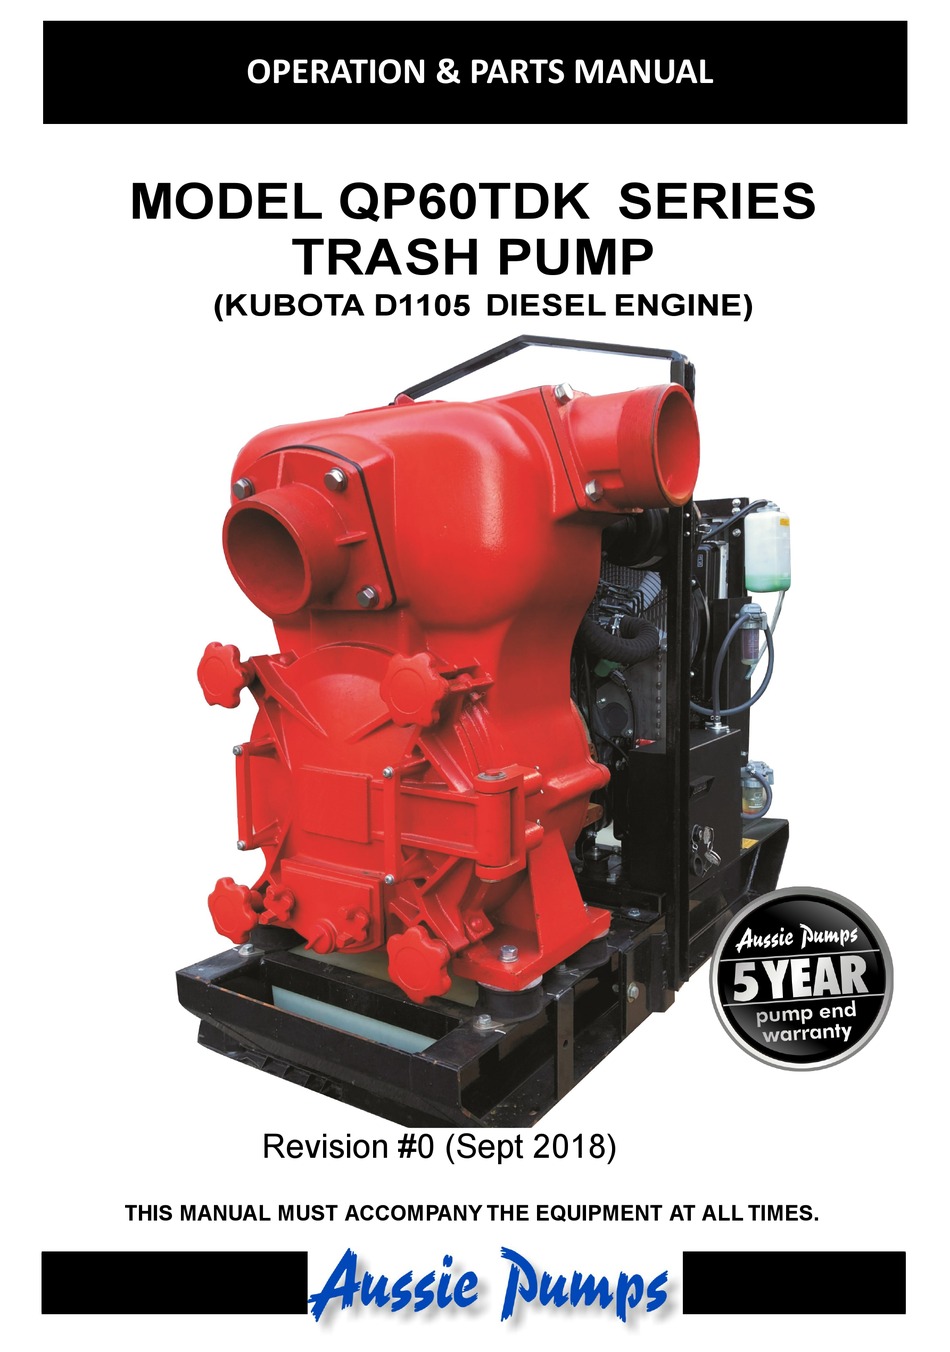 AUSSIE PUMPS ECO-CLEAN WHY1520 HYD WATER PUMP OPERATOR'S INSTRUCTION MANUAL